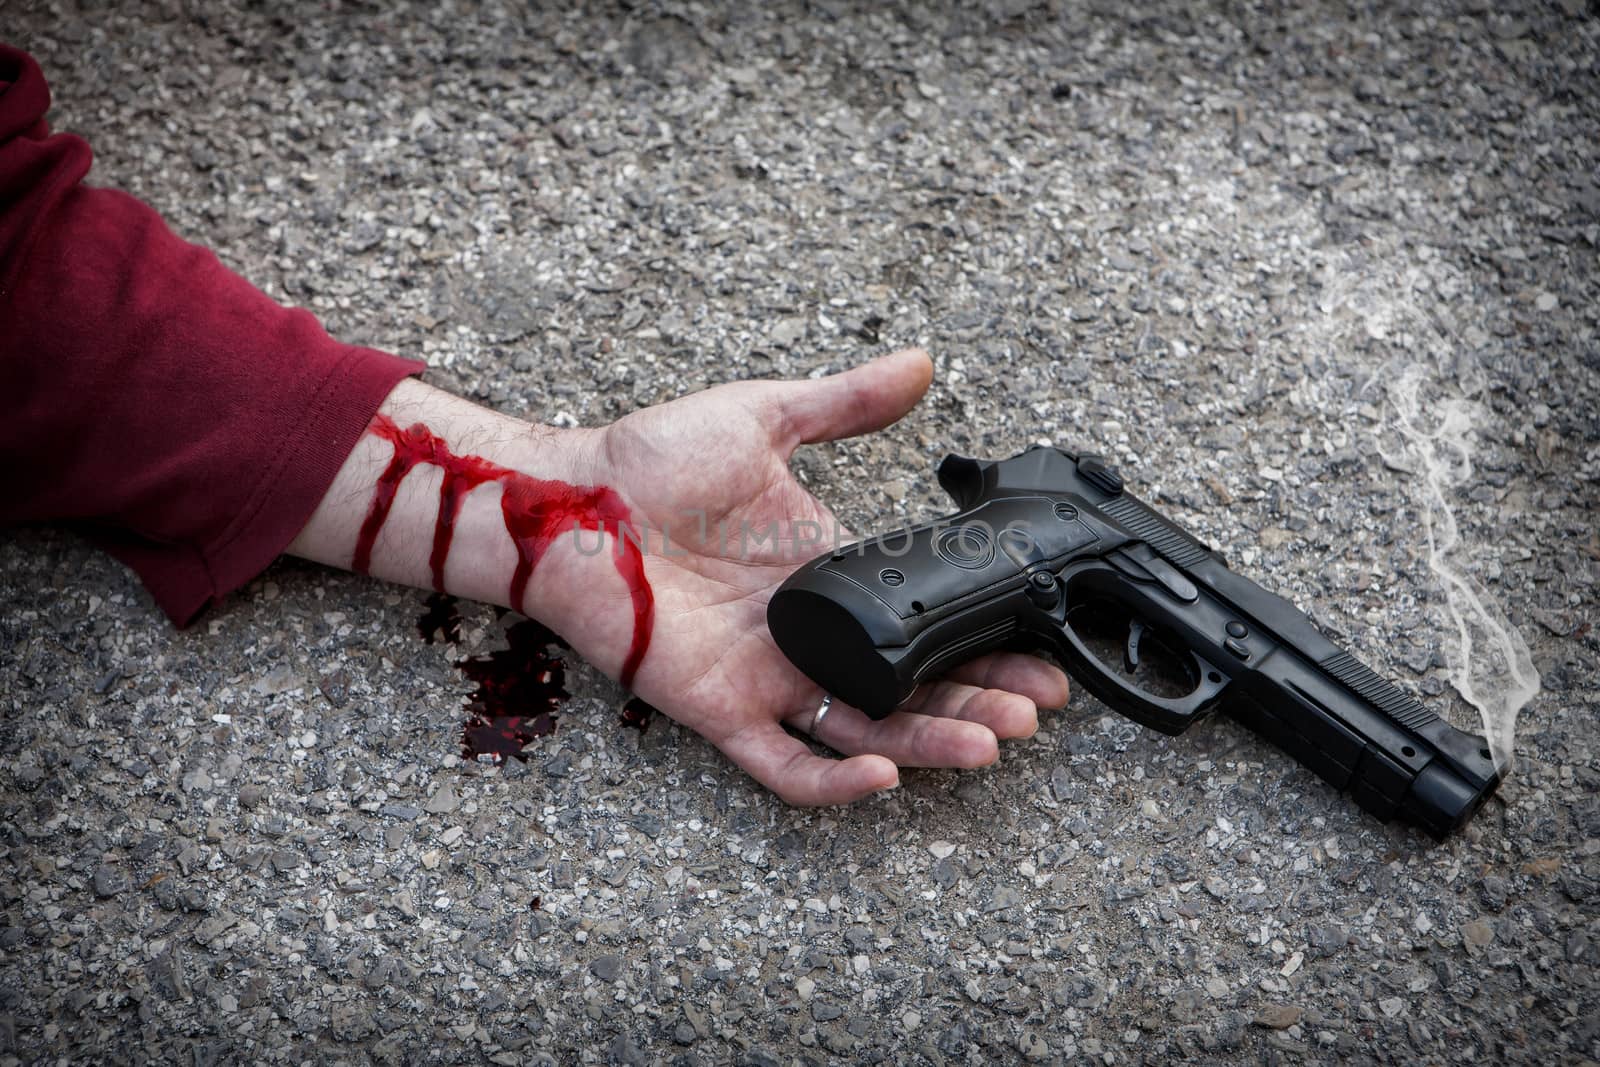 Man with gun in hand bloodstained lies dead in the asphalt murde by digicomphoto